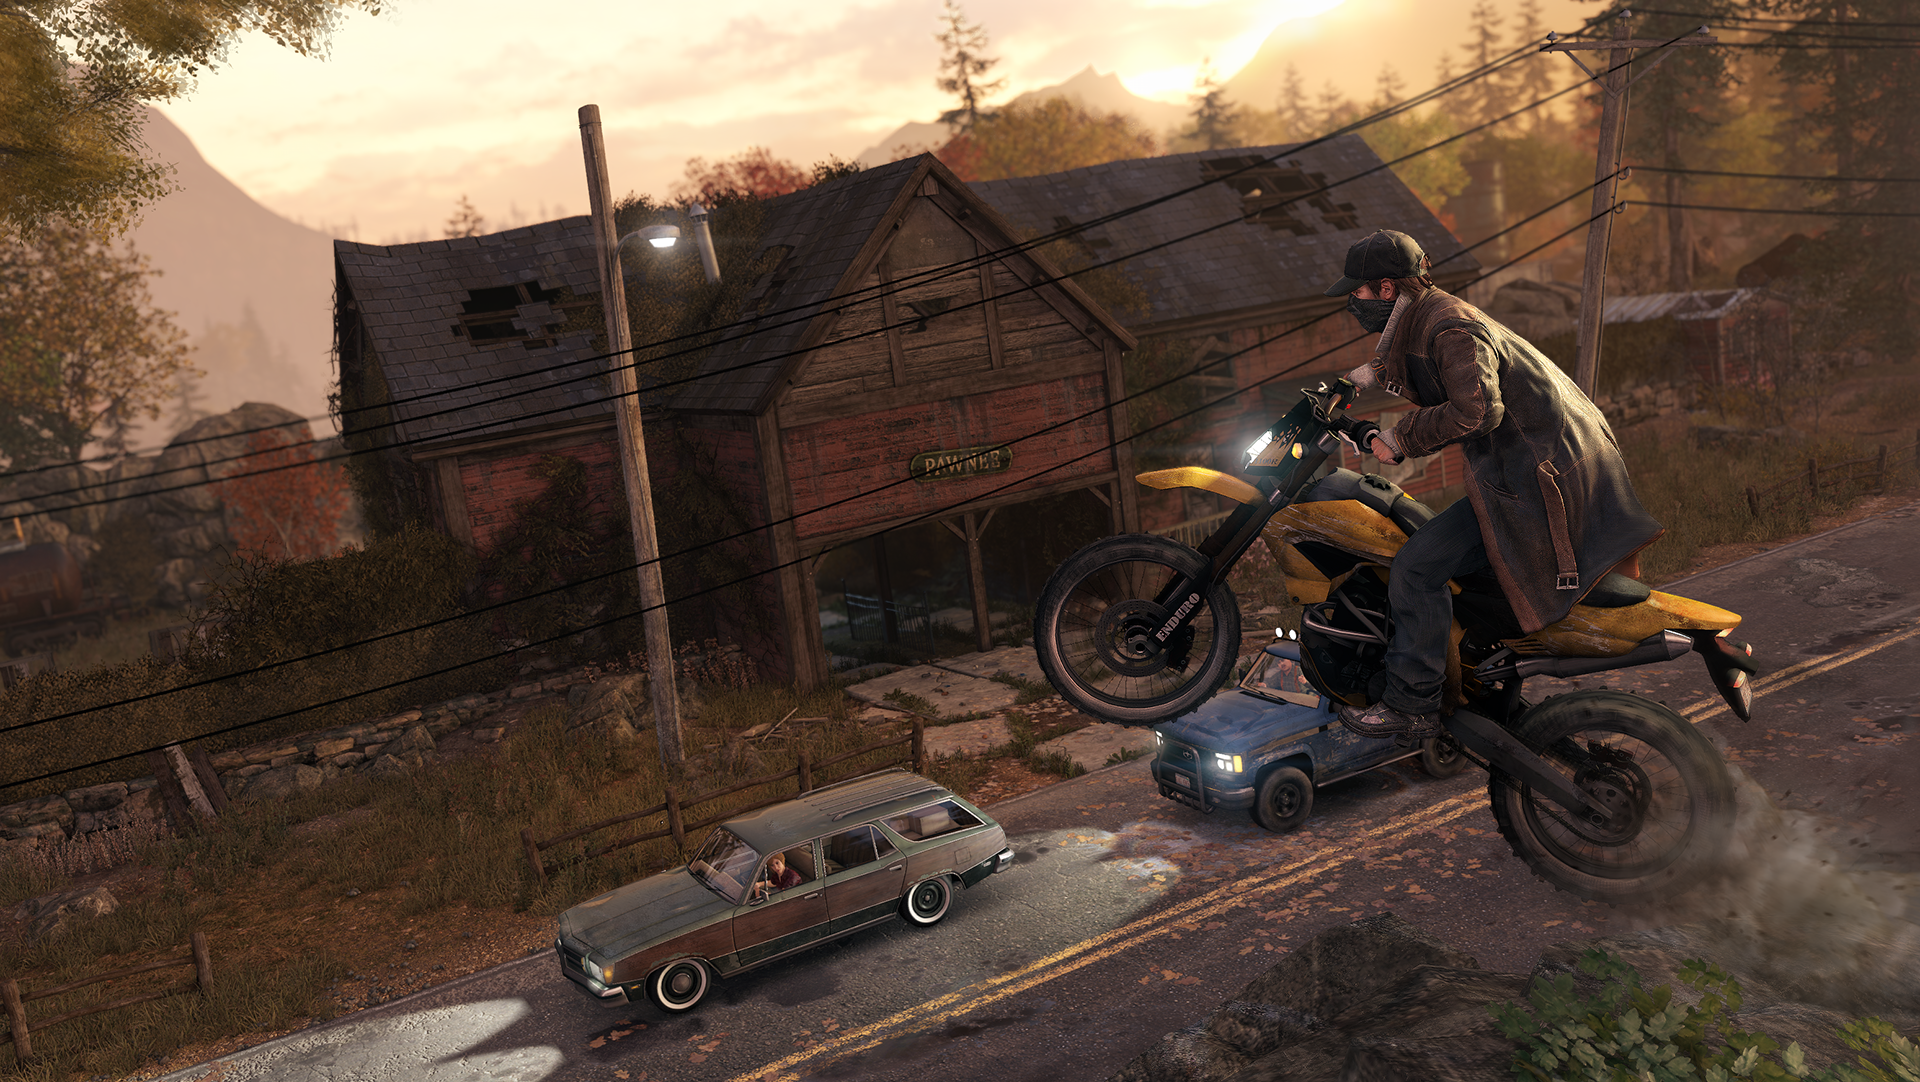 Watch_Dogs_MOTORCYCLE